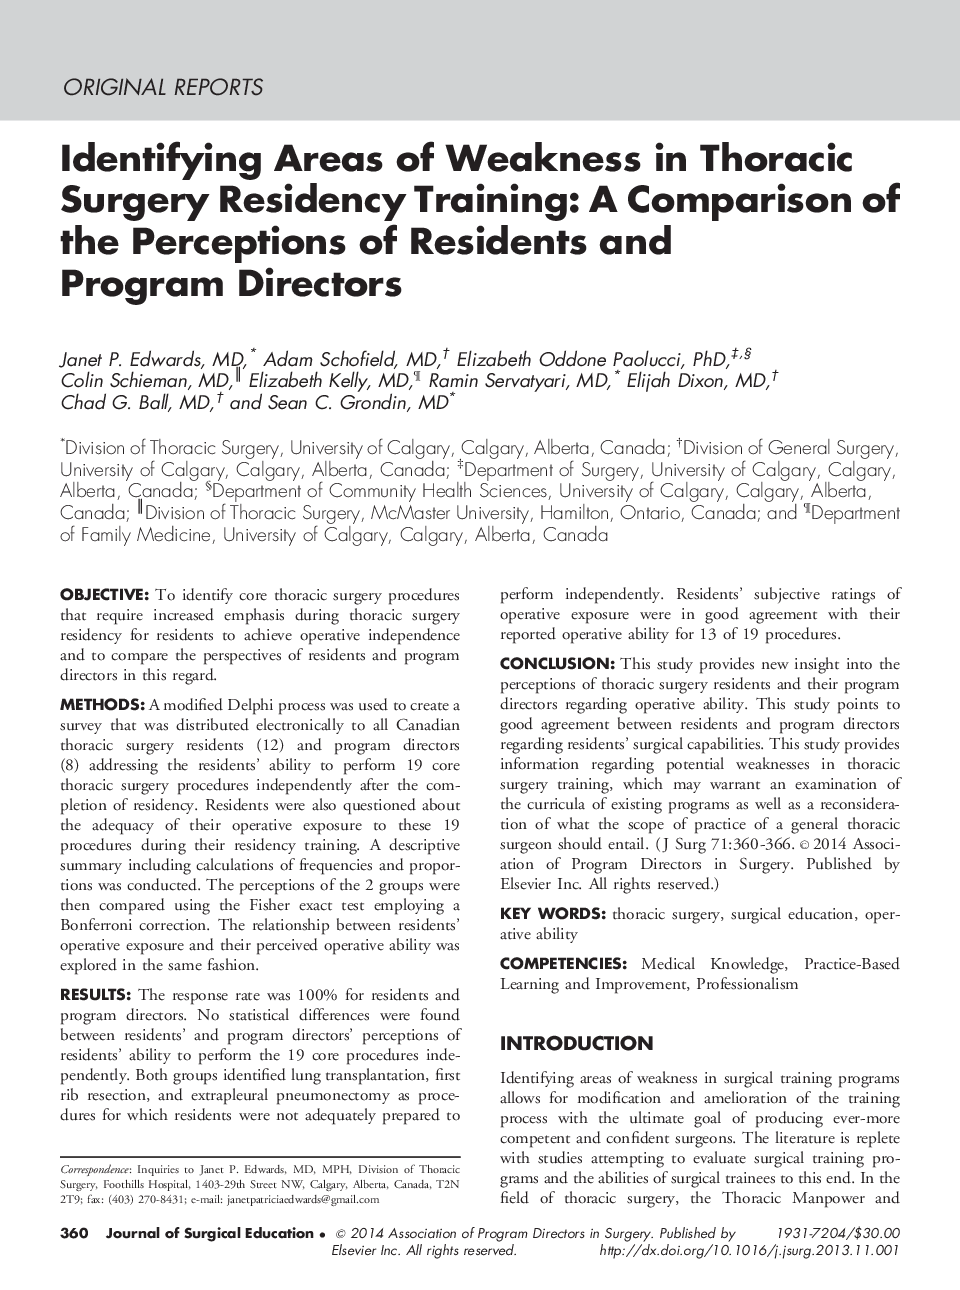 Identifying Areas of Weakness in Thoracic Surgery Residency Training: A Comparison of the Perceptions of Residents and Program Directors